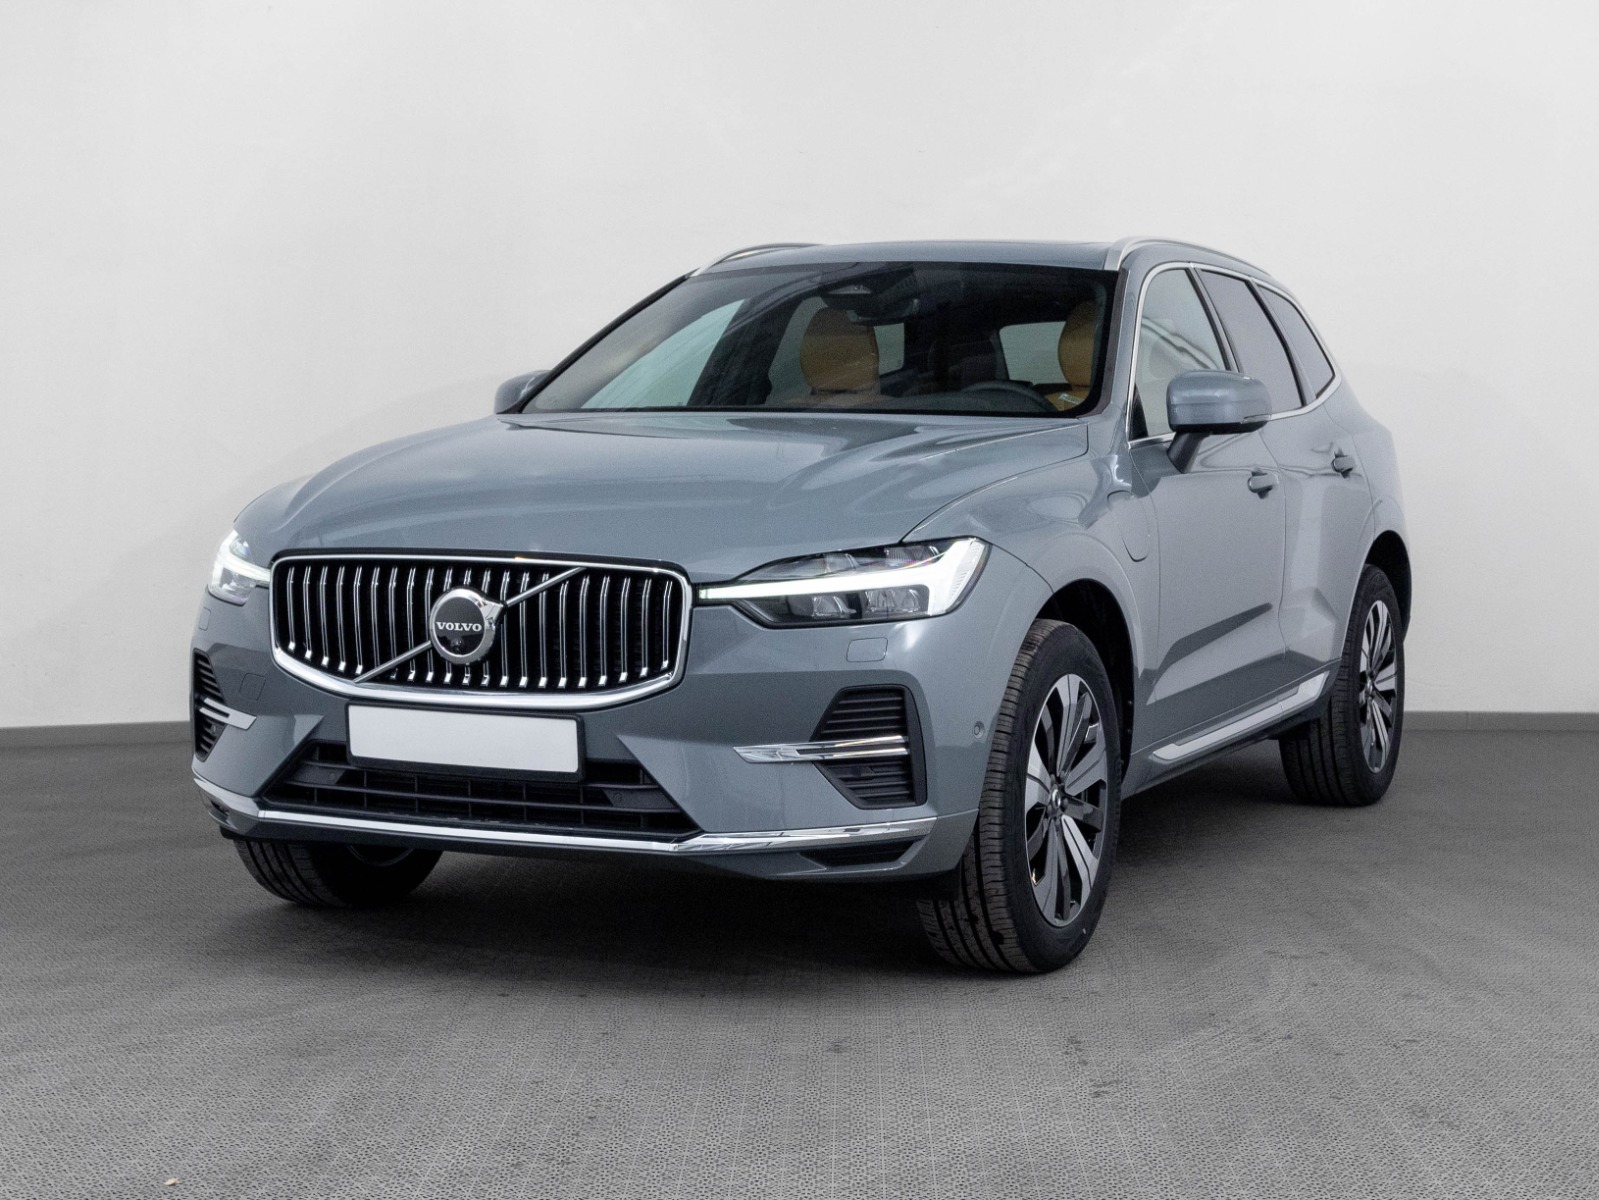 Volvo XC60 T8 AWD Recharge PHEV Plus Bright Geartronic